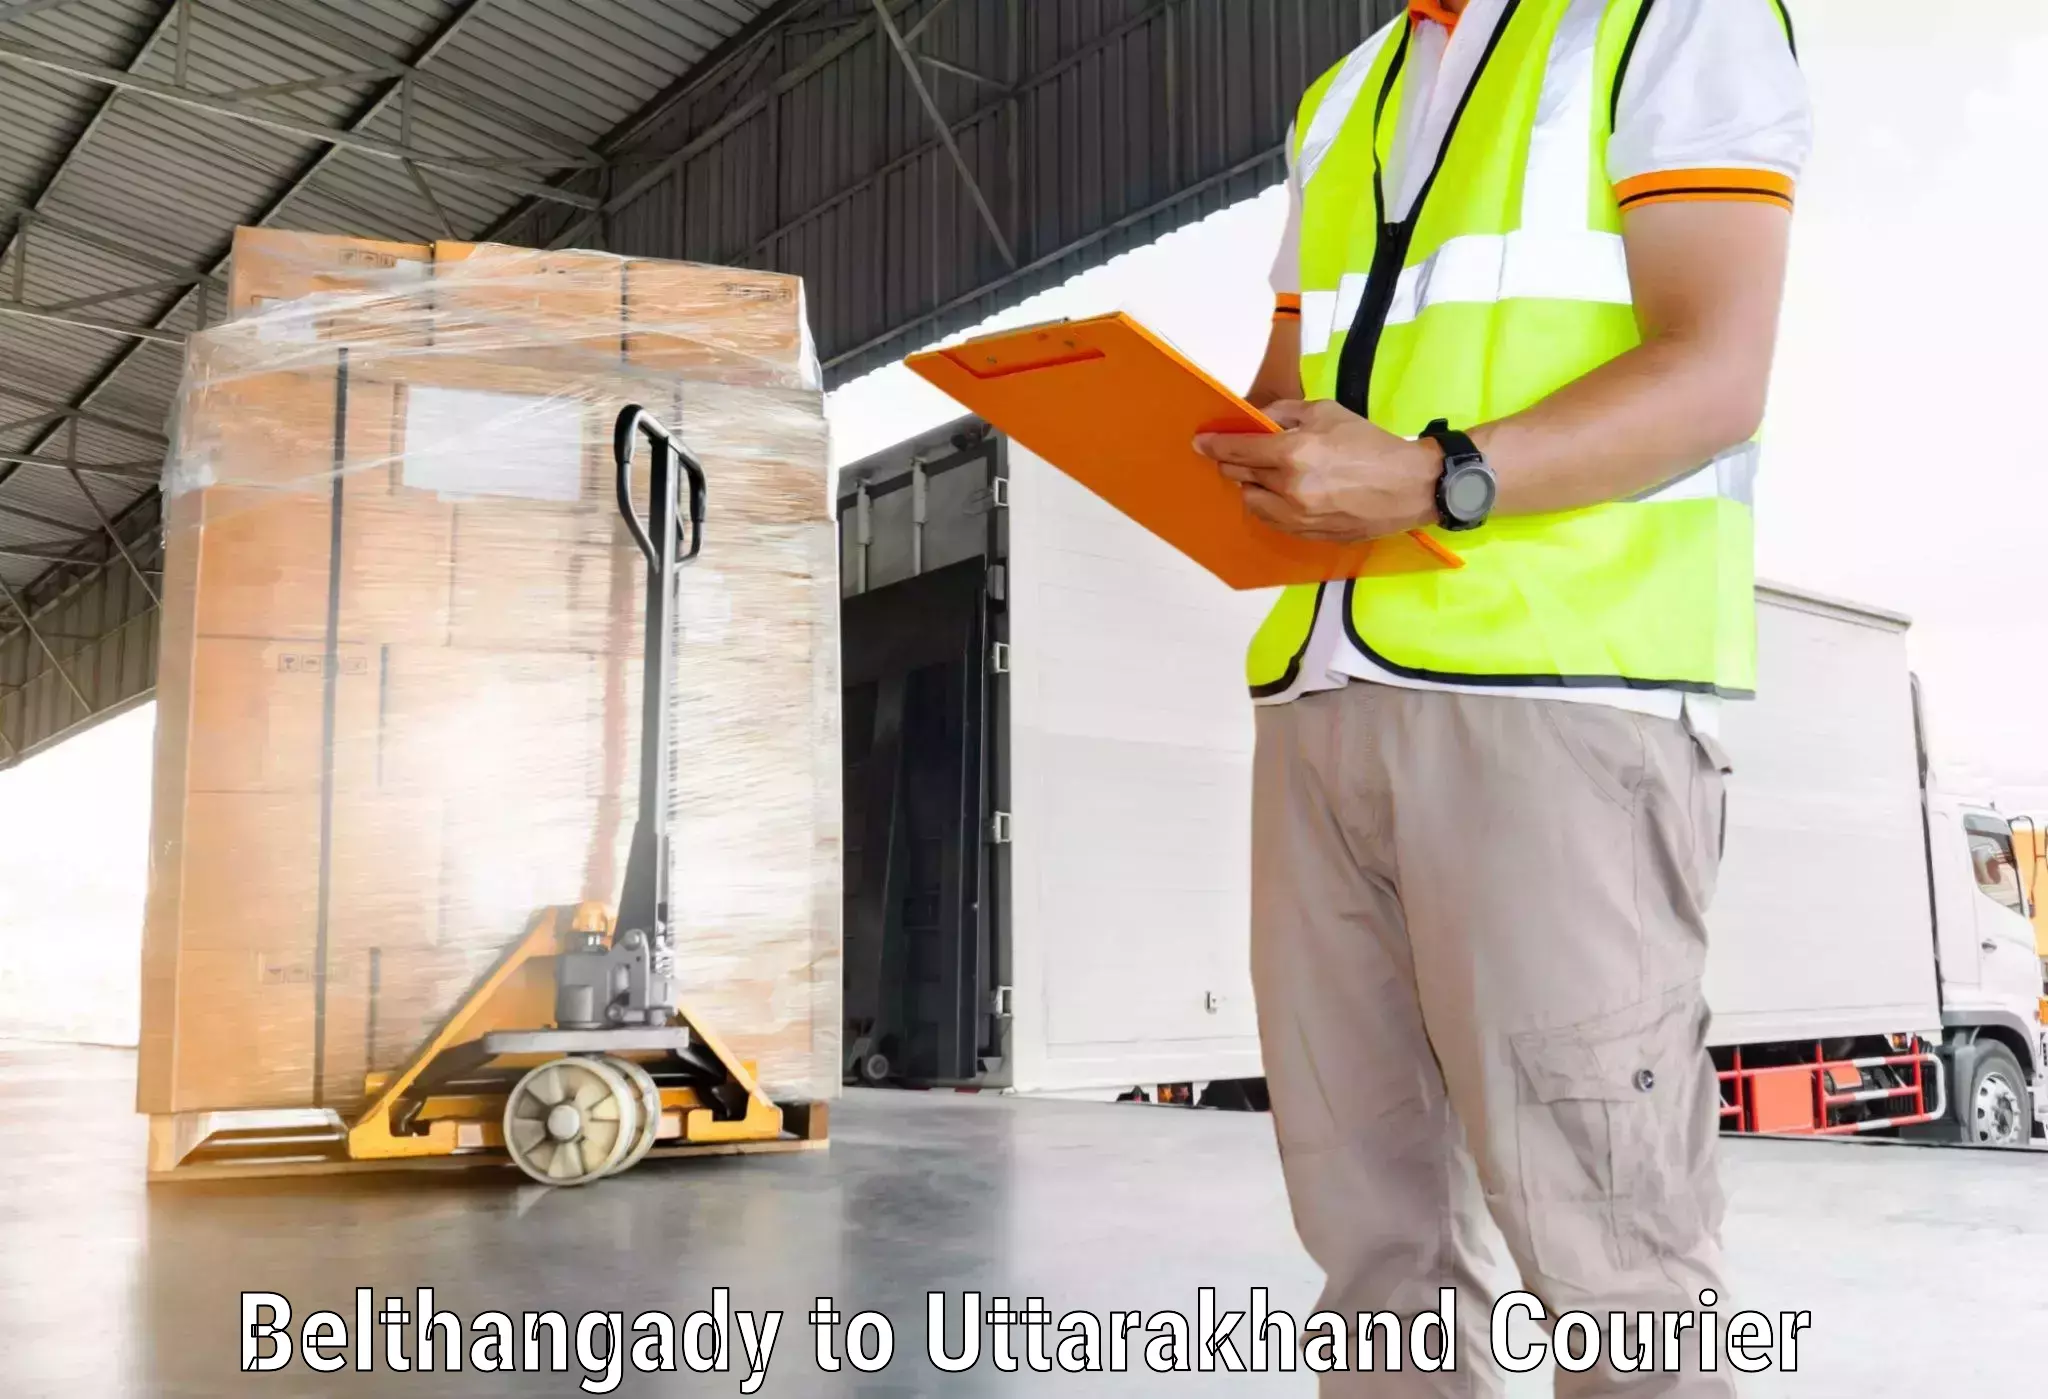 Global courier networks Belthangady to Lansdowne